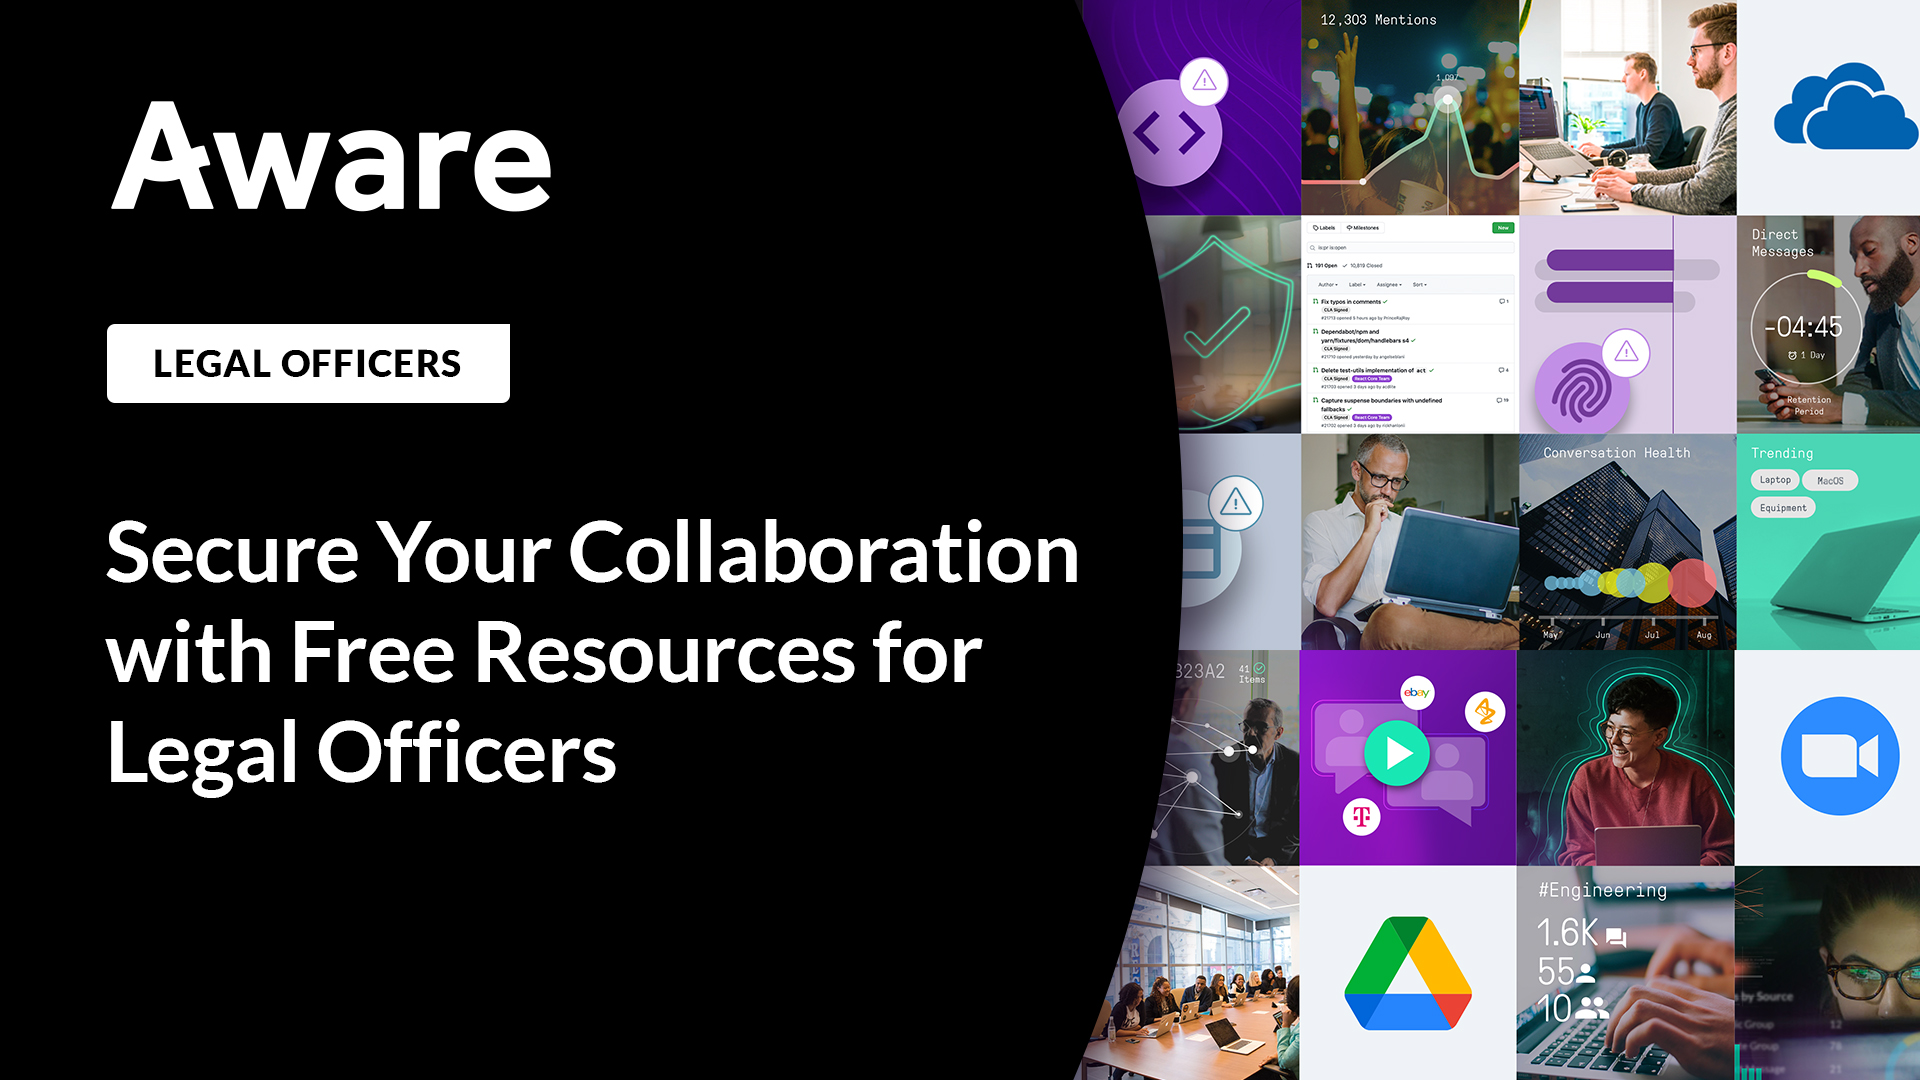 Secure Collaboration with Free Resources for Legal Officers from Aware